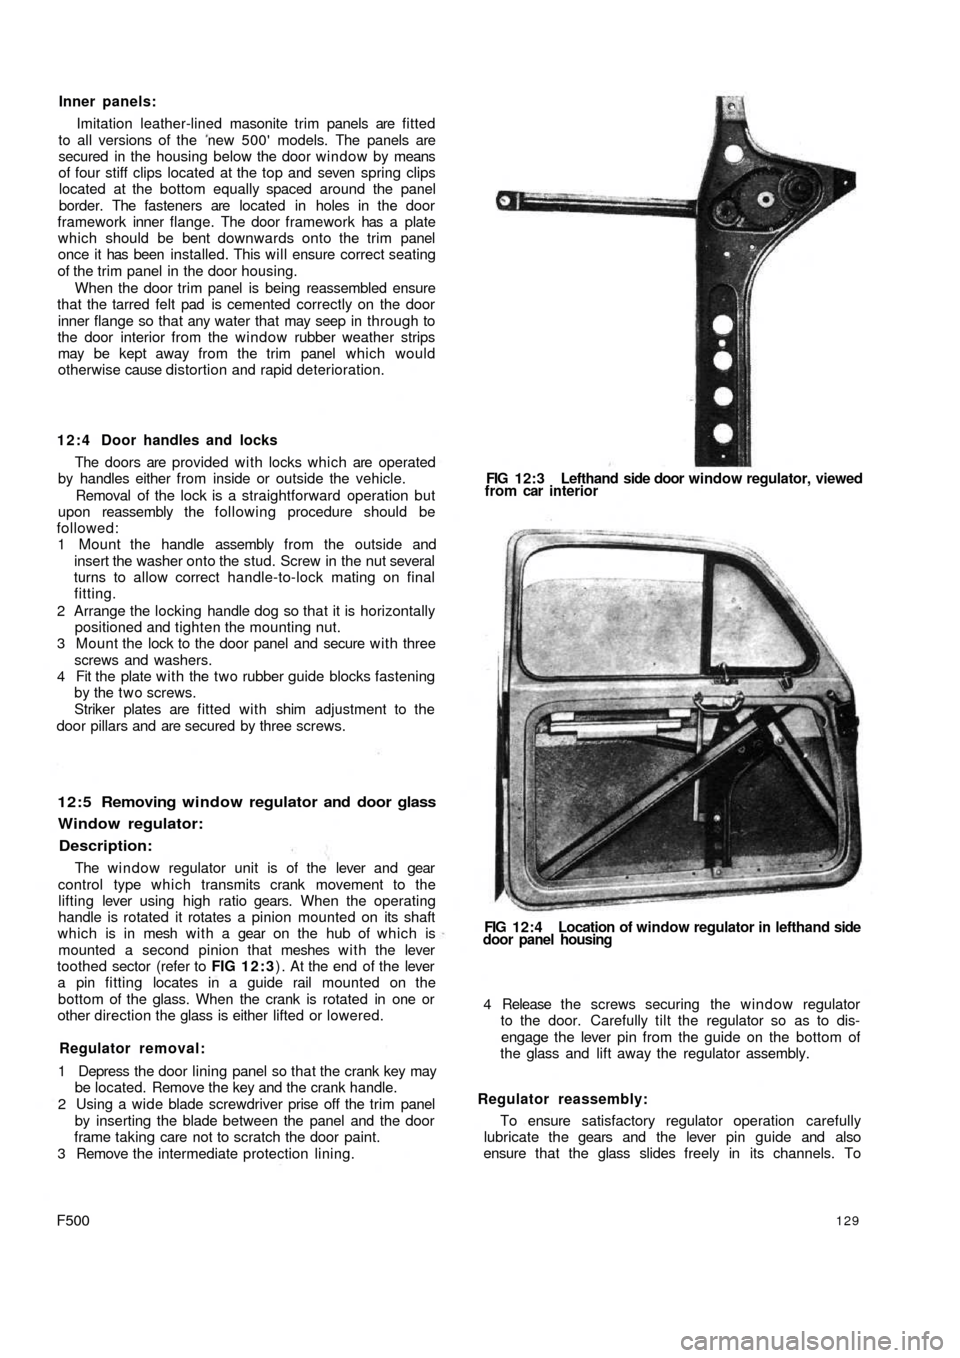 FIAT 500 1970 1.G Workshop Manual Inner panels:
Imitation leather-lined masonite trim panels are fitted
to all versions of the  new 500 models. The panels are
secured in the housing below the door window by means
of four stiff clips 